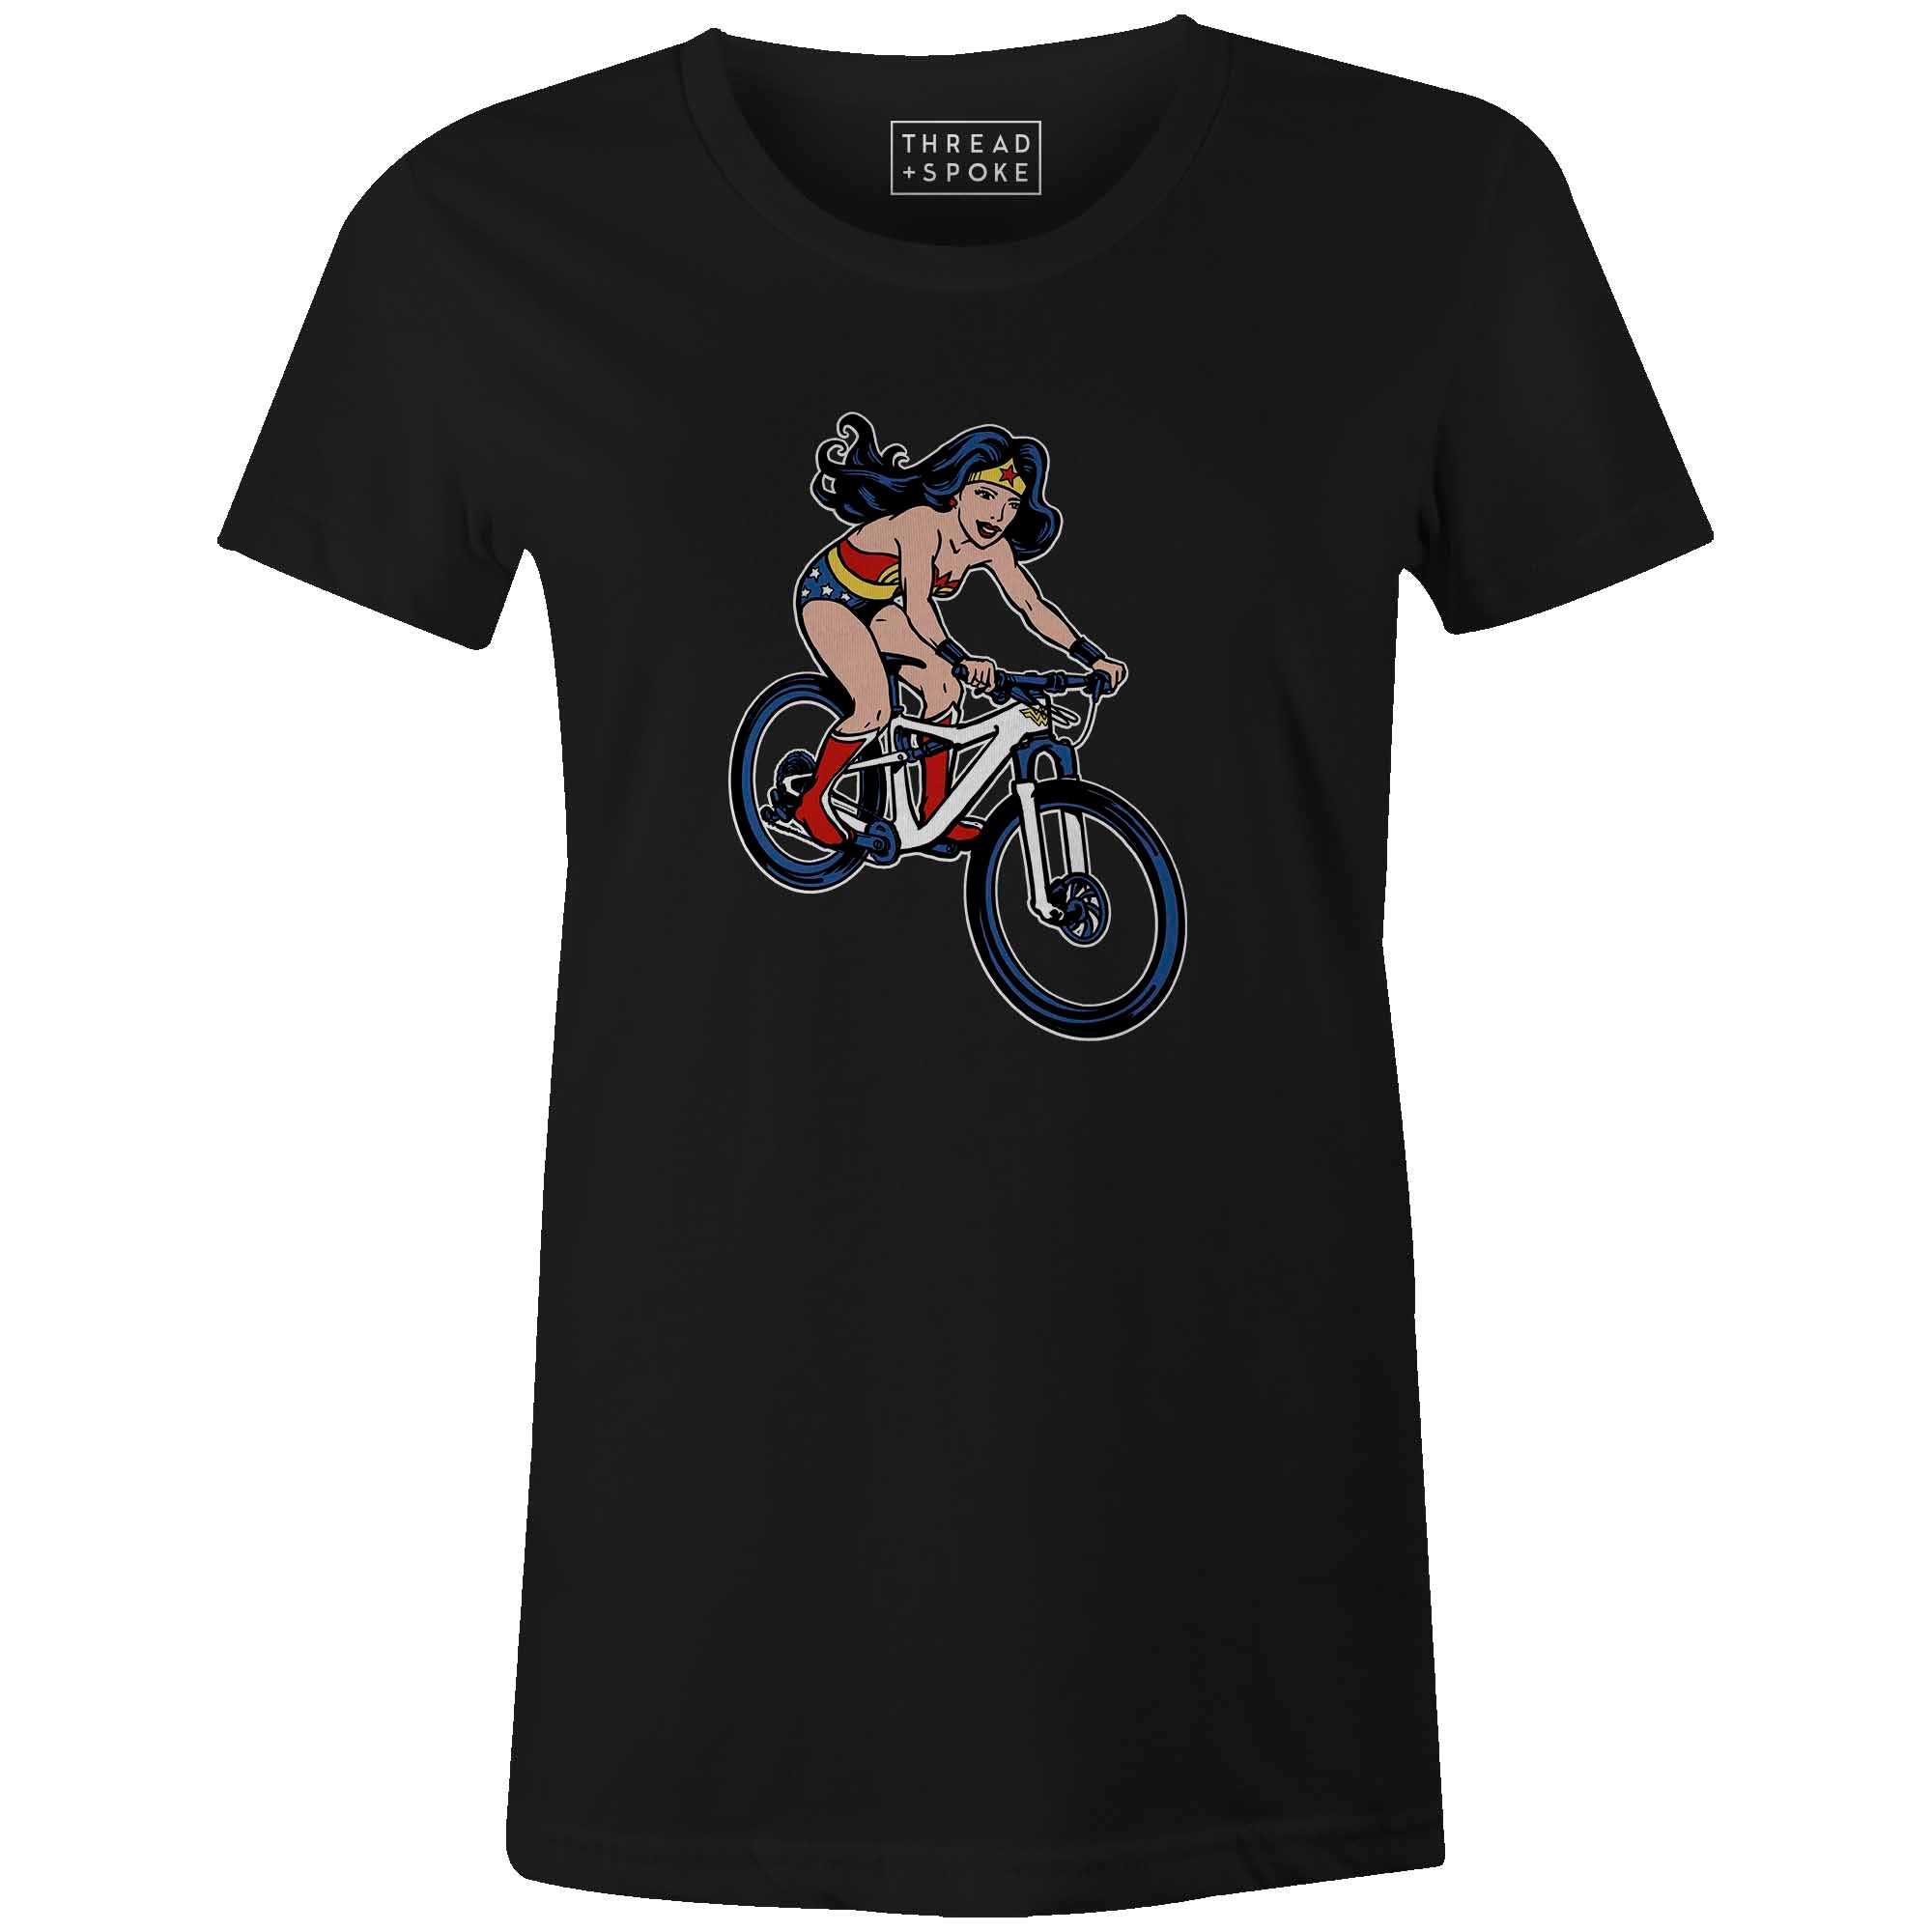 Women's T-shirt - MTB of Justice